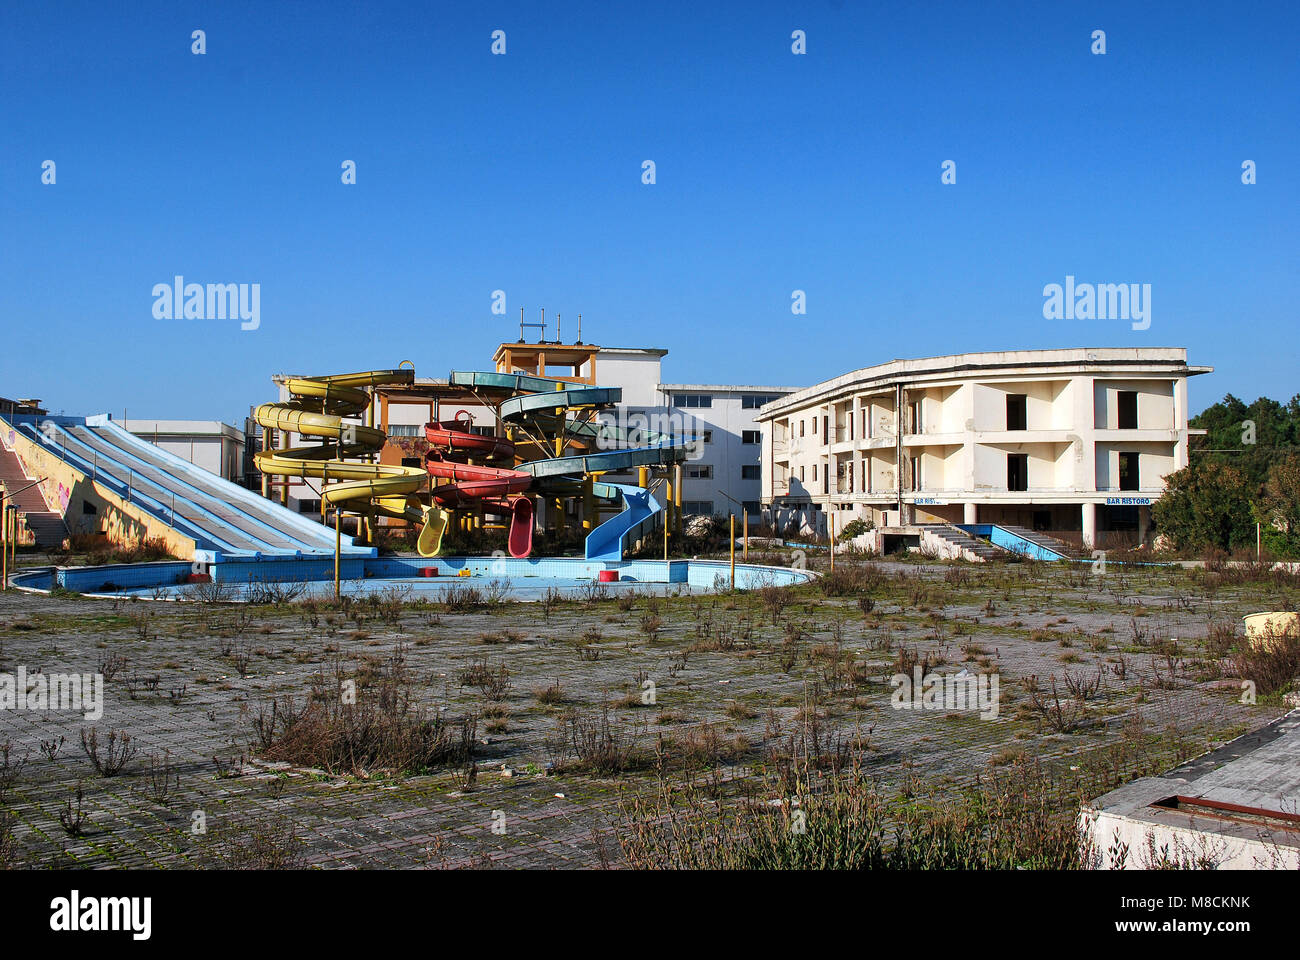 Swimming pool in Villaggio Coppola. The construction of the village is an example of illegal building on a large scale - Castel Volturno, Italy Stock Photo